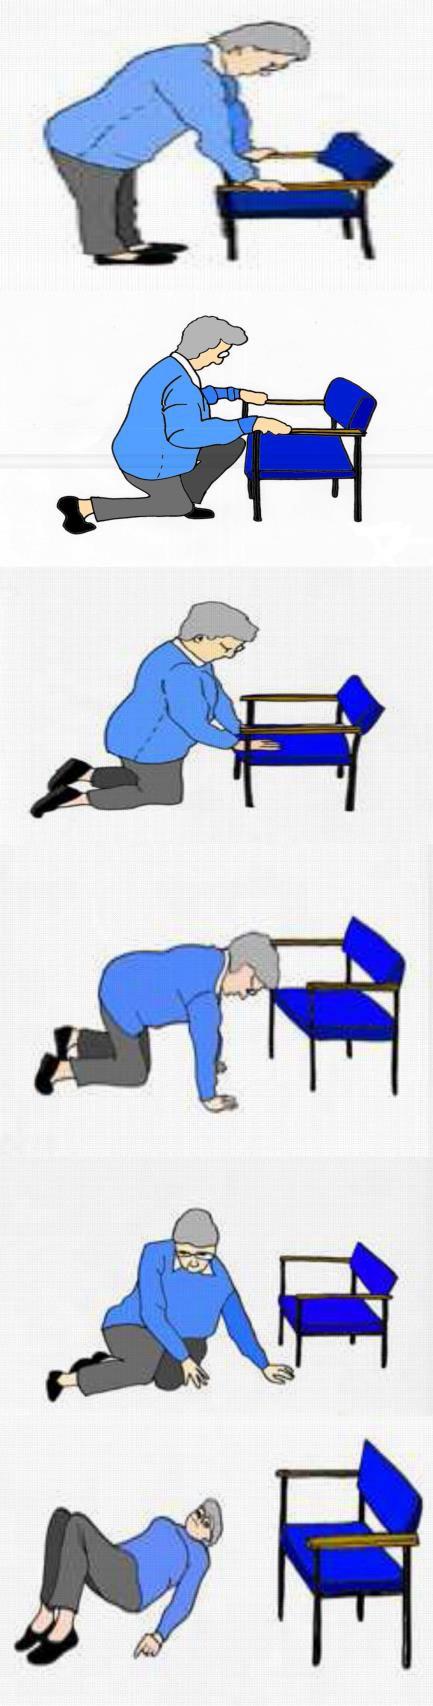 Getting on the Floor 1. Turn to face the chair, using the arms or seat for support if necessary. 2. Slowly lower yourself onto your knees, one leg at a time. 3.